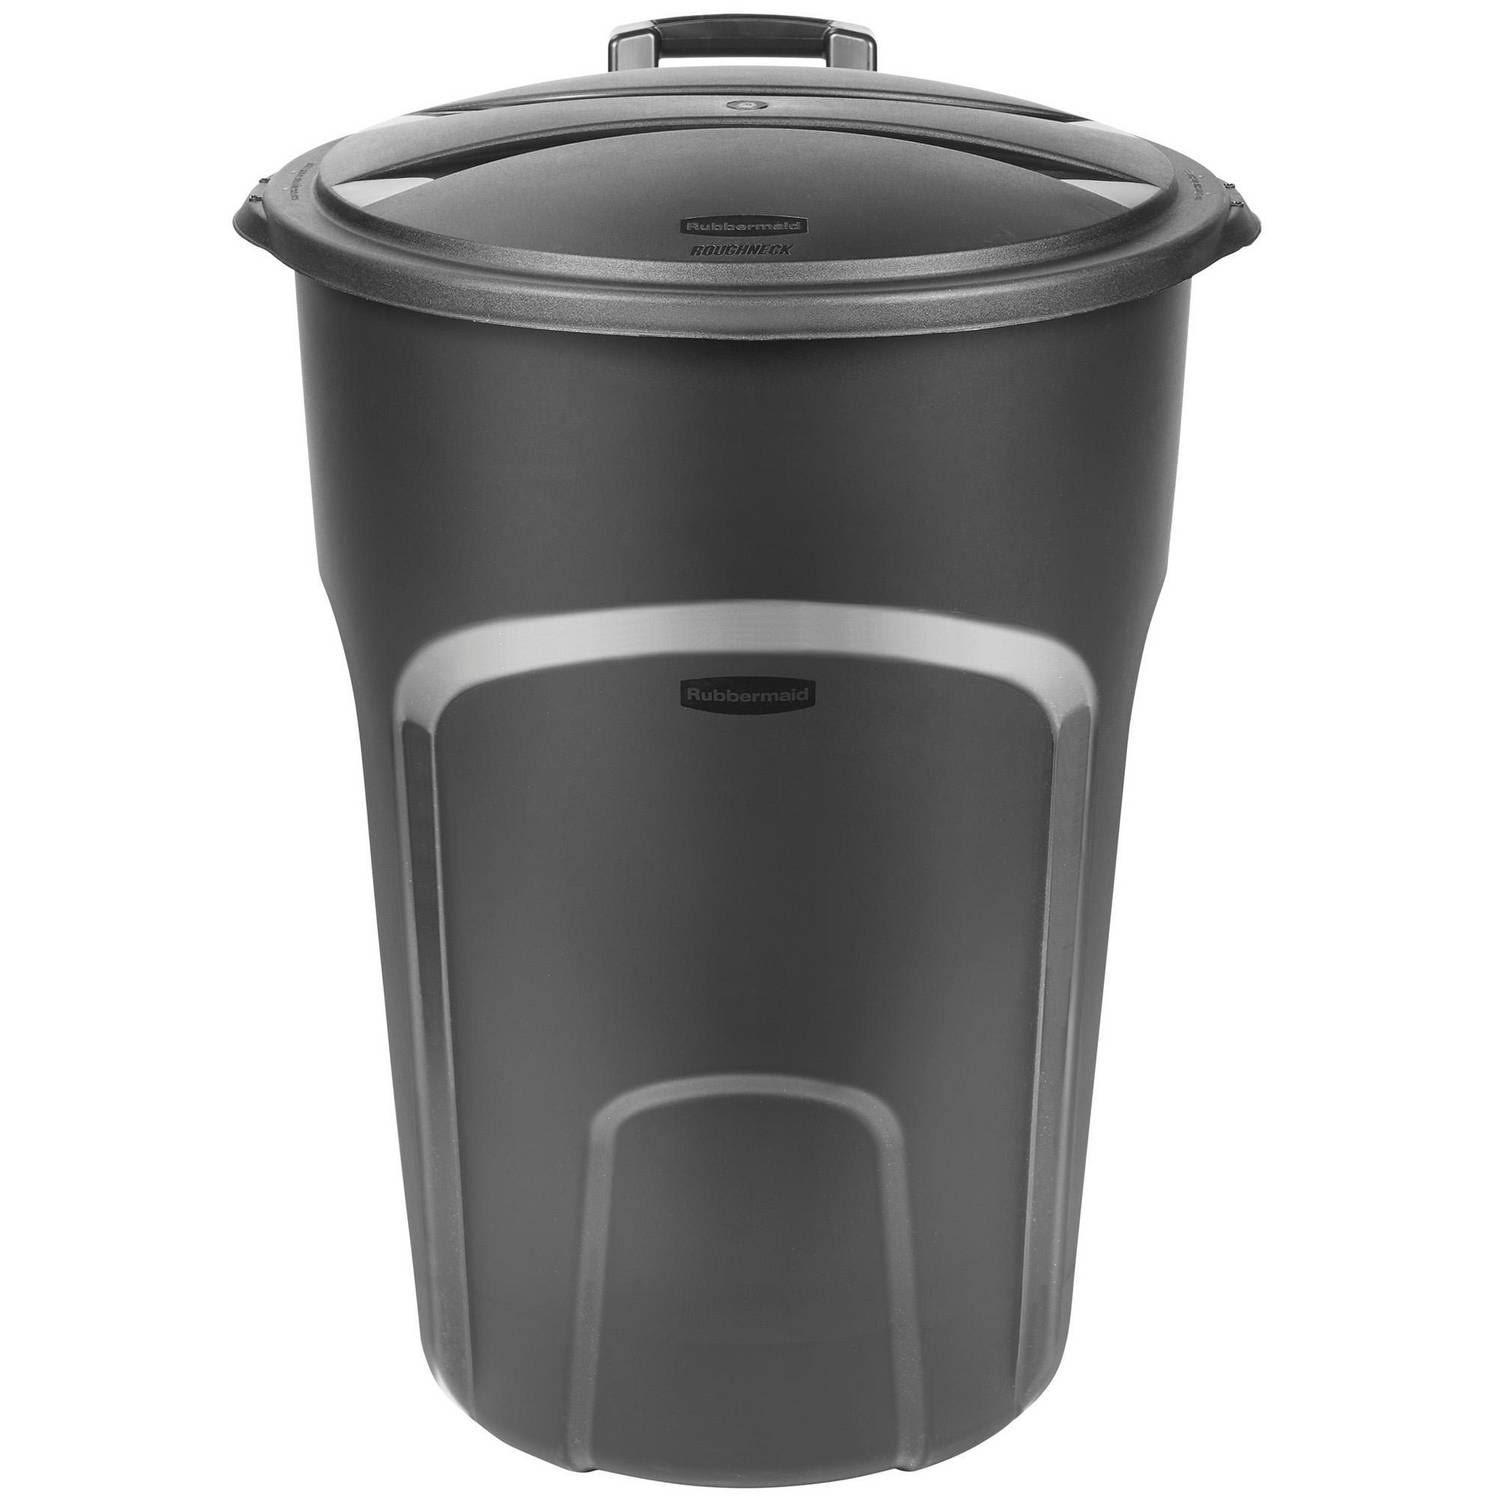 Rubbermaid Roughneck Wheeled Trash Can with Lid - Black, 32L